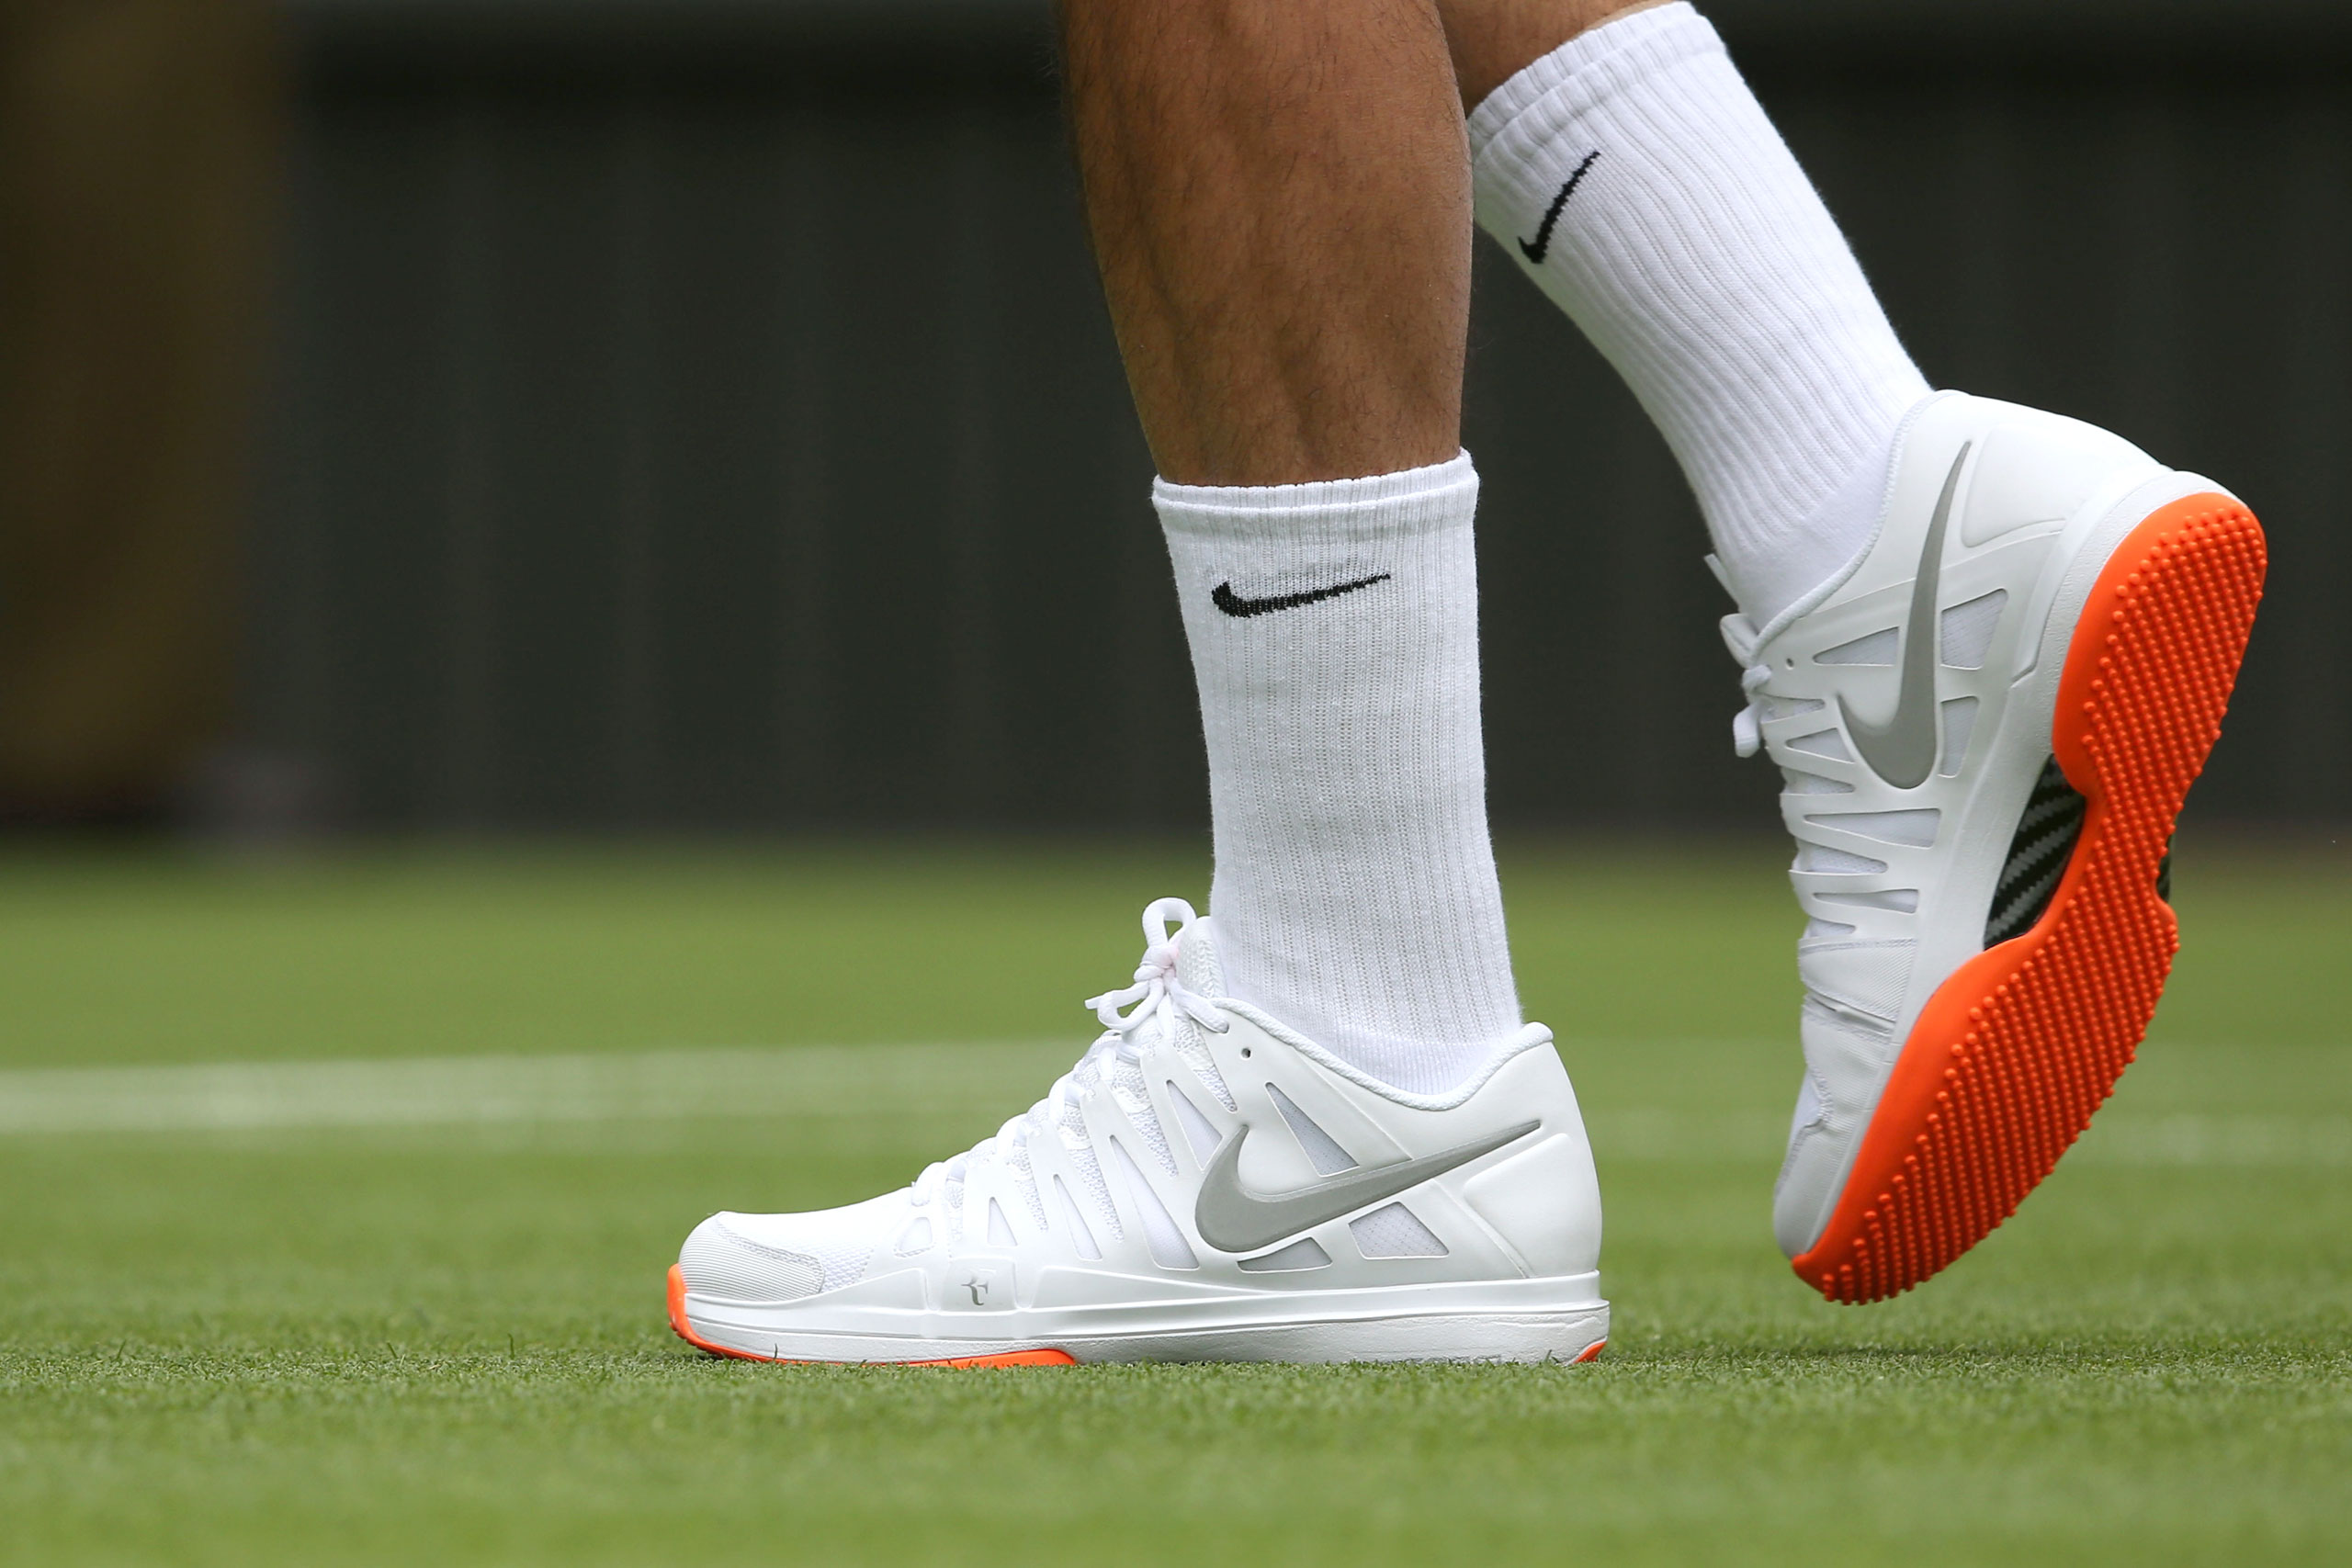 Roger Federer's orange soled Nike shoes were banned by Wimbledon officials in 2013 for violating the tournament’s all-white dress code.